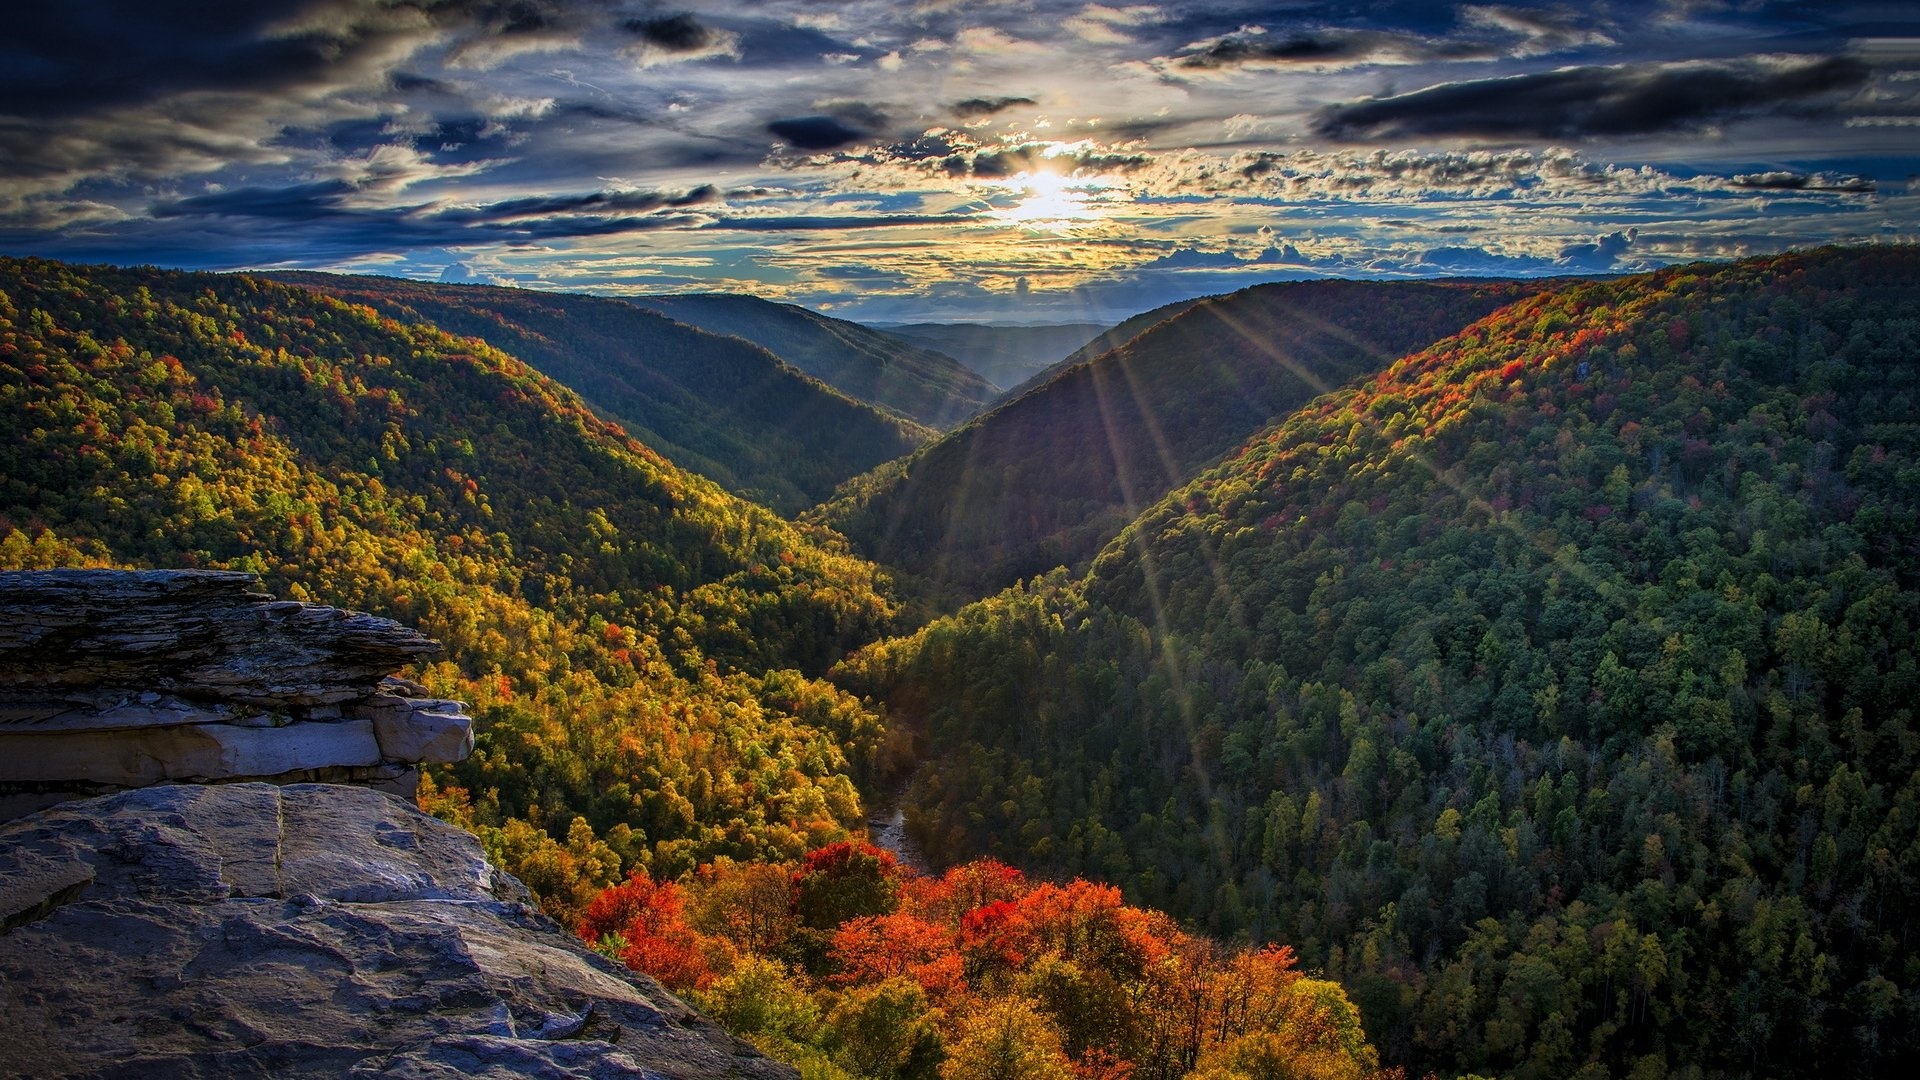 West Virginia wallpapers, State pride, Vibrant backgrounds, Scenic beauty, 1920x1080 Full HD Desktop